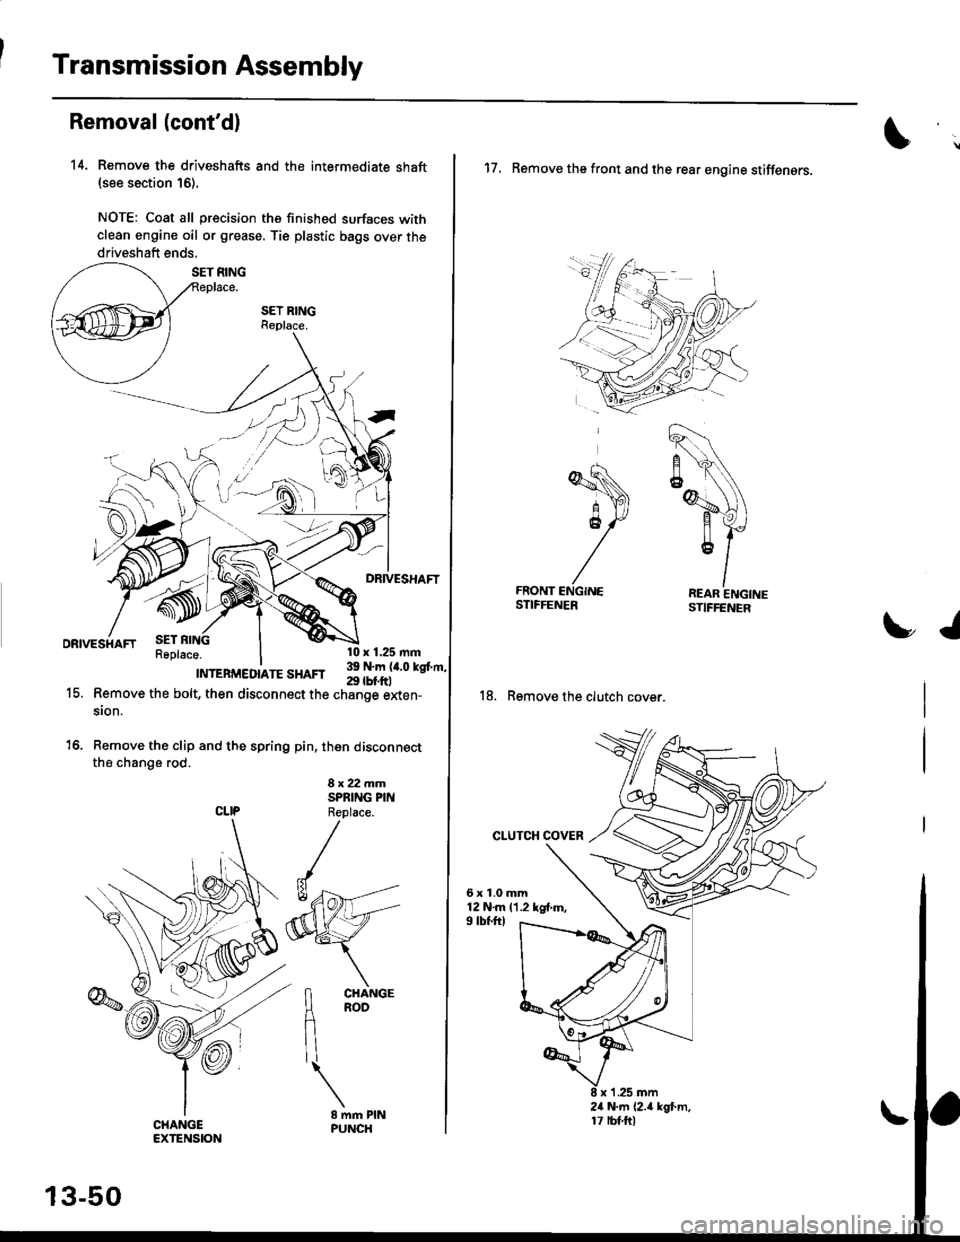 HONDA CIVIC 1999 6.G Workshop Manual Transmission Assembly
Removal(contd)
14. Remove the driveshafts and the intermediate shaft(see section 16).
NOTE: Coat all precision the finished surfaces with
clean engine oil or grease. Tie plastic